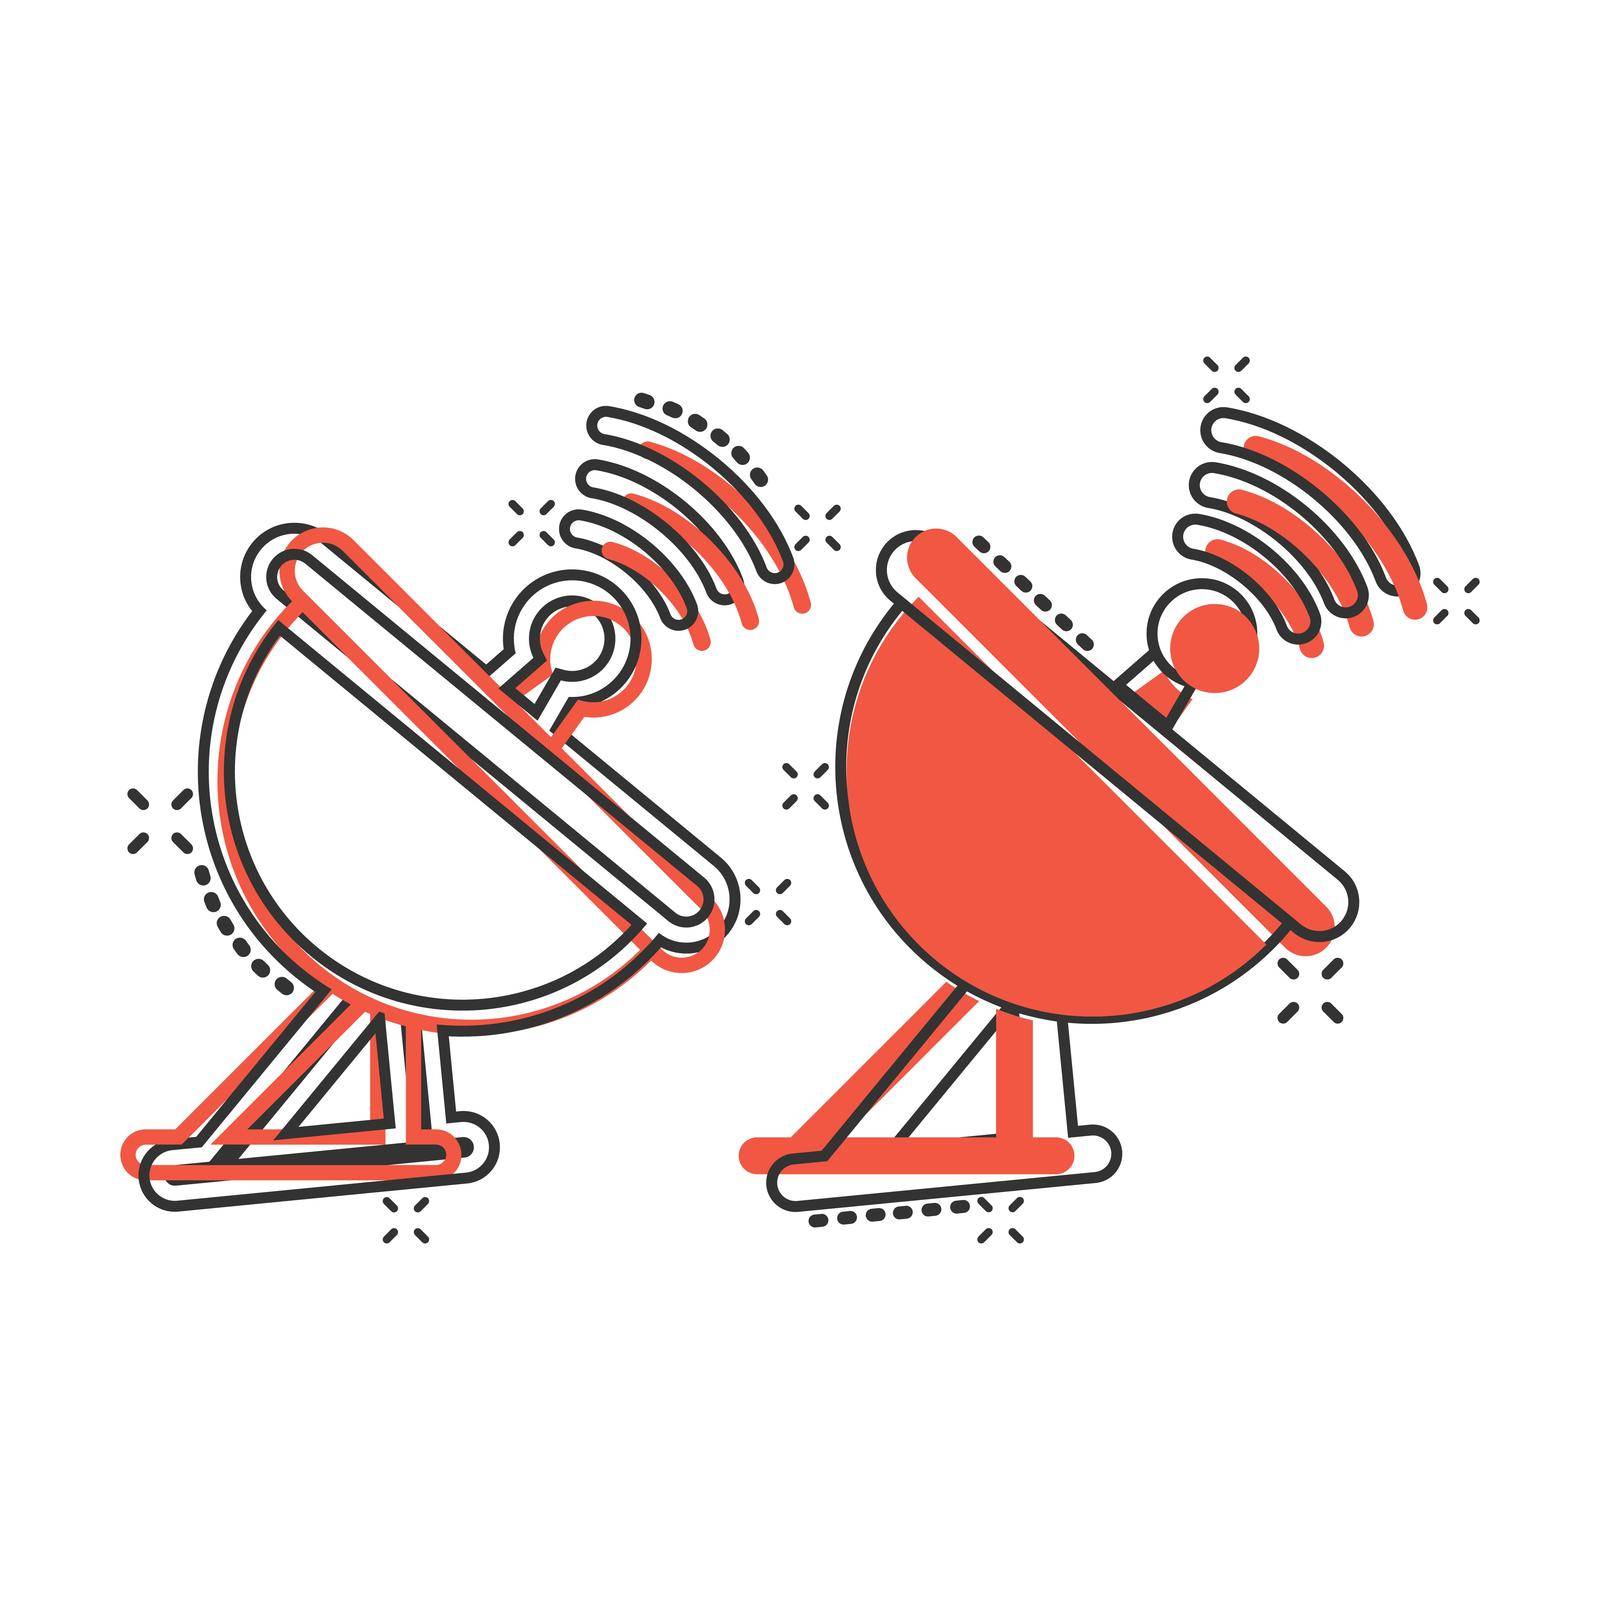 Satellite antenna tower icon in comic style. Broadcasting cartoon by LysenkoA